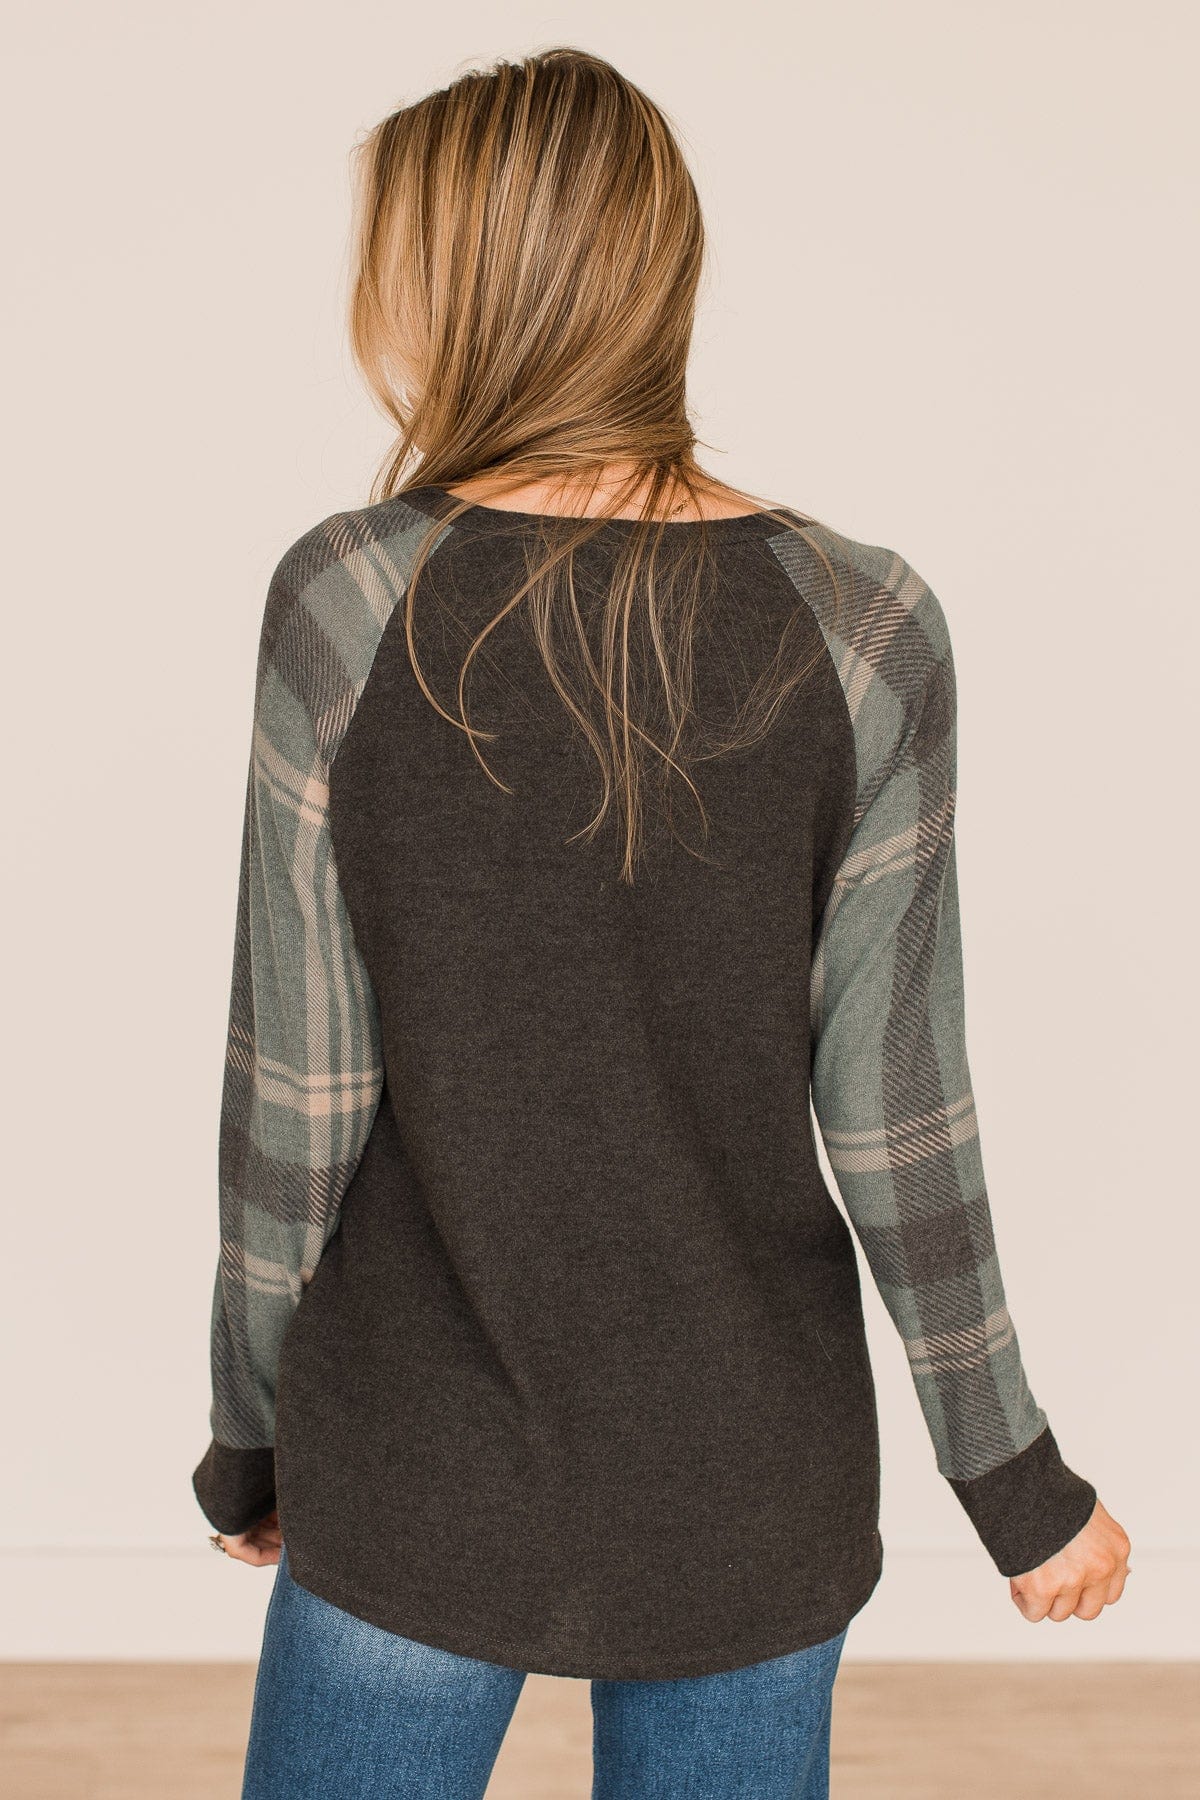 Late Nights In Plaid Pocket Top- Dusty Teal & Charcoal